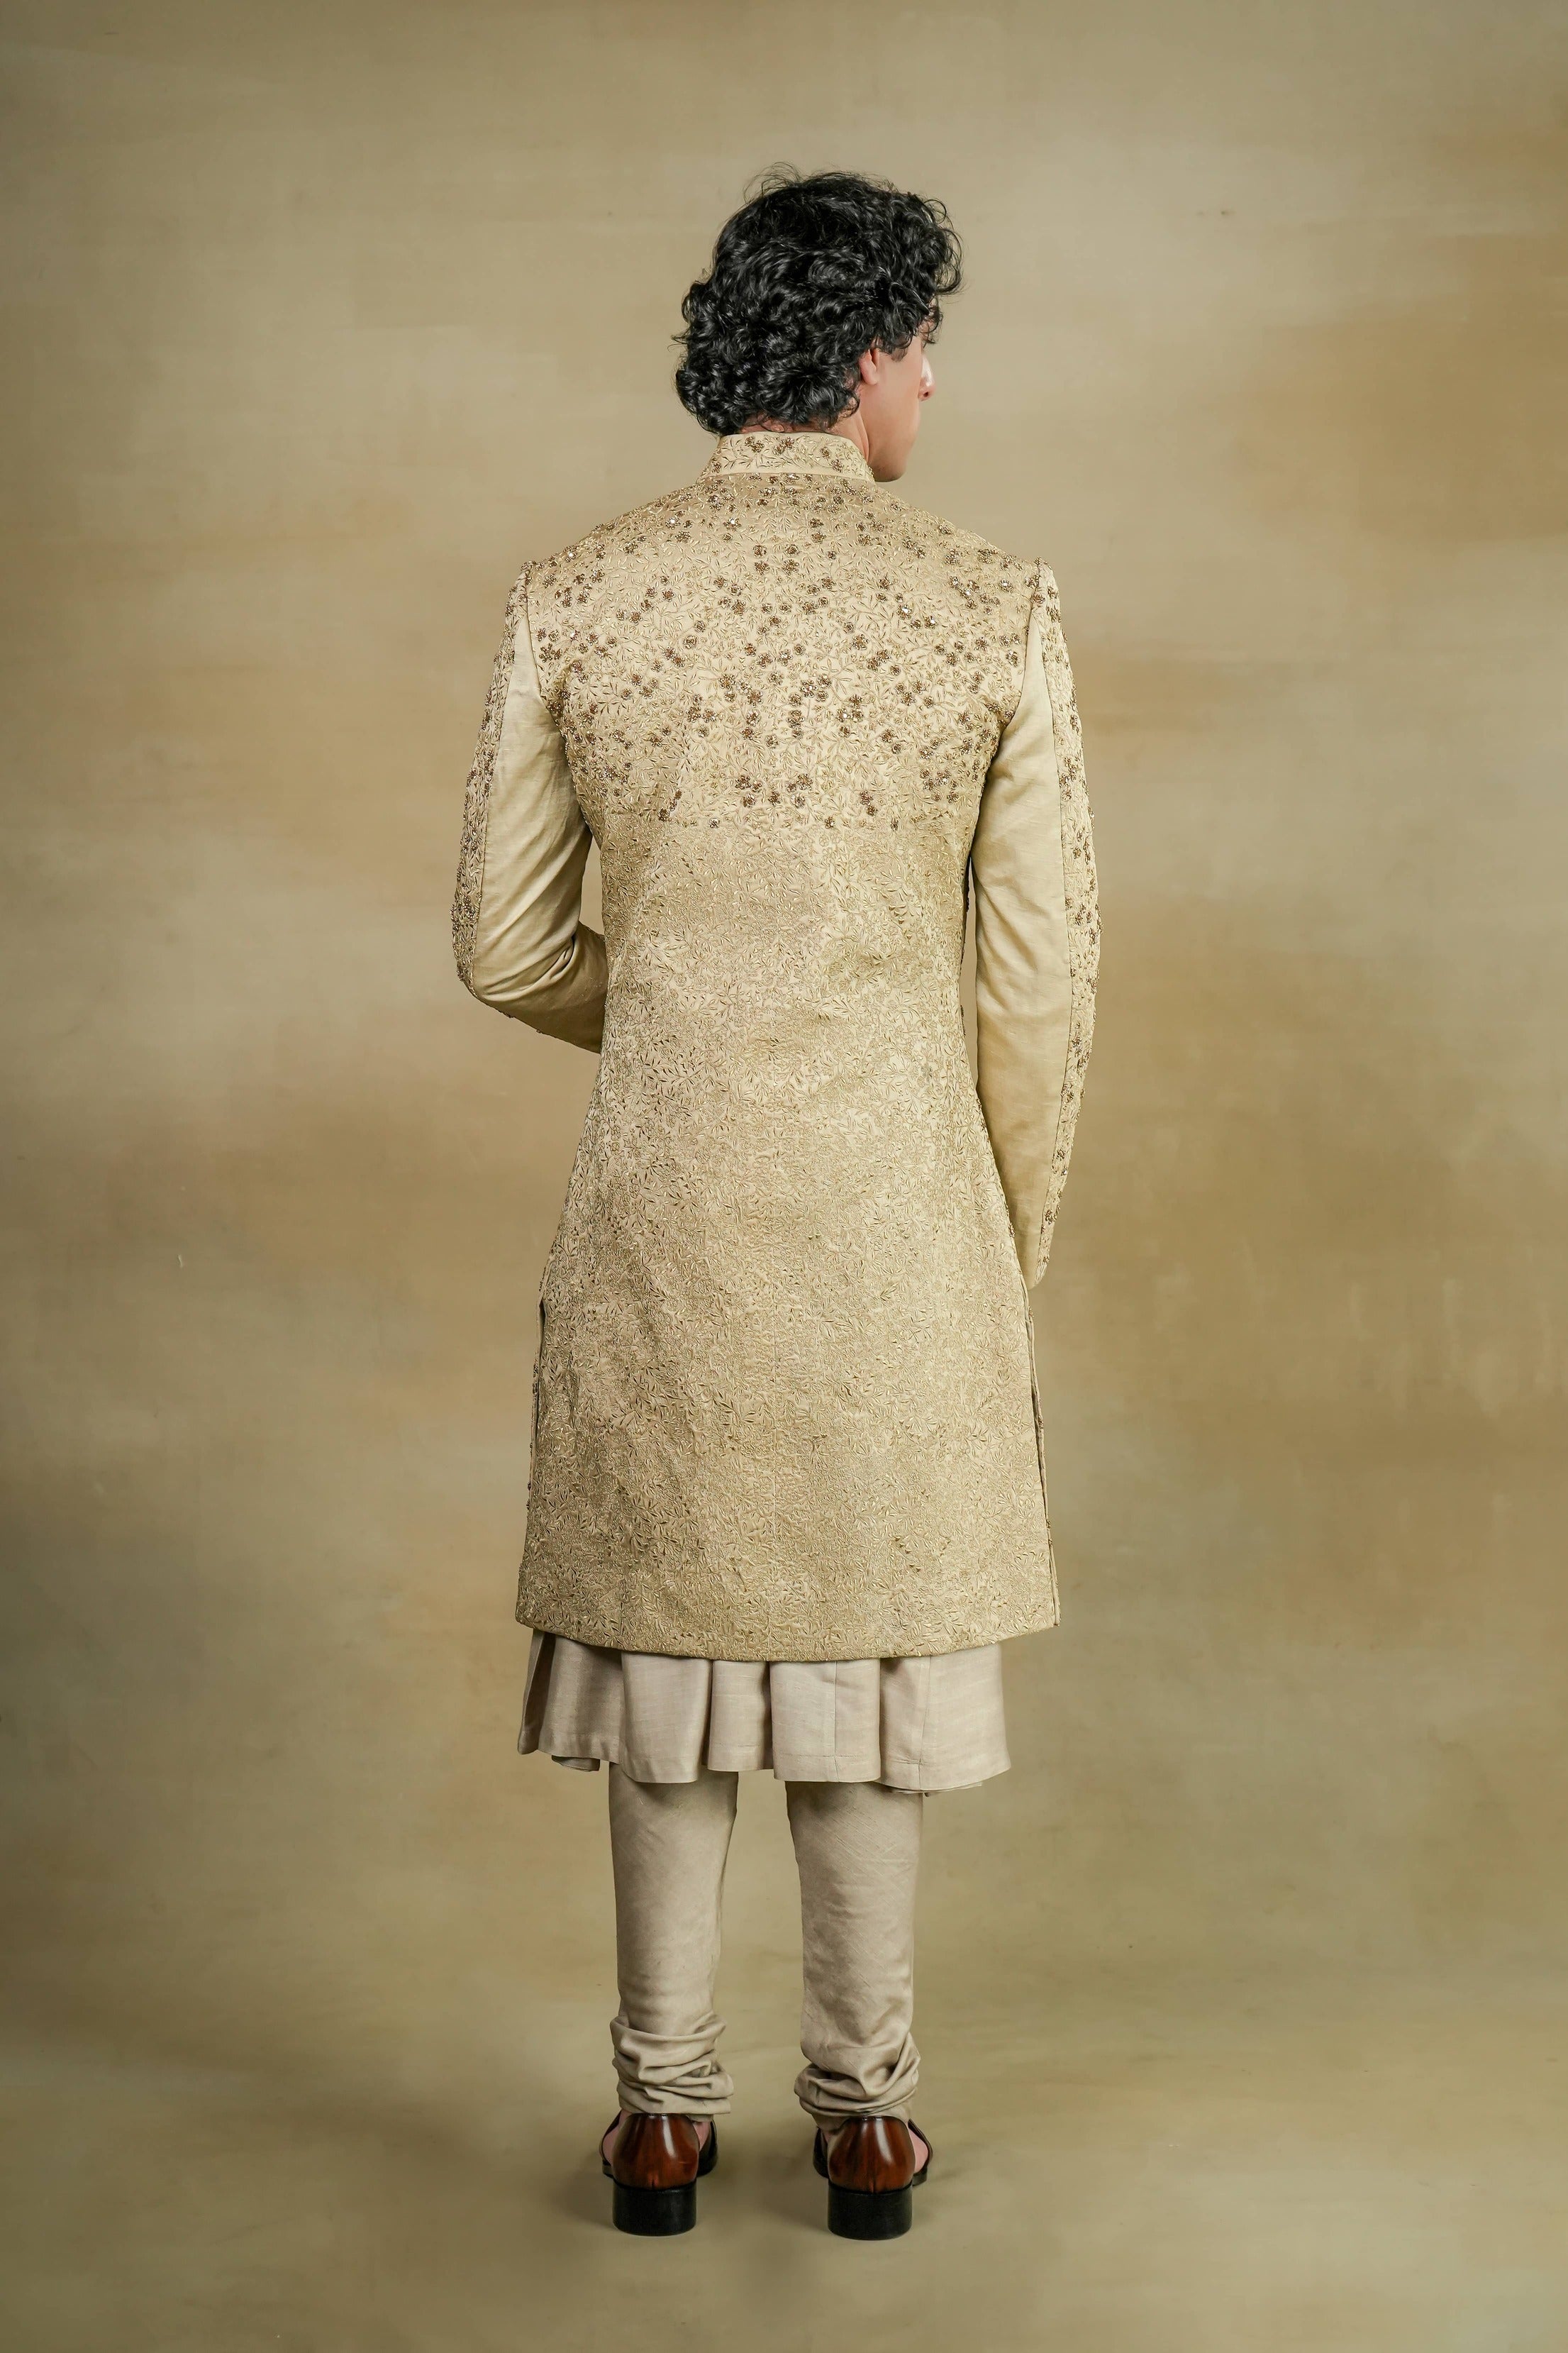 Back view of the Sandune Sherwani, showcasing detailed embroidery and a tailored fit.Full view of the Sandune Sherwani on a mannequin, emphasizing its sophisticated silhouette